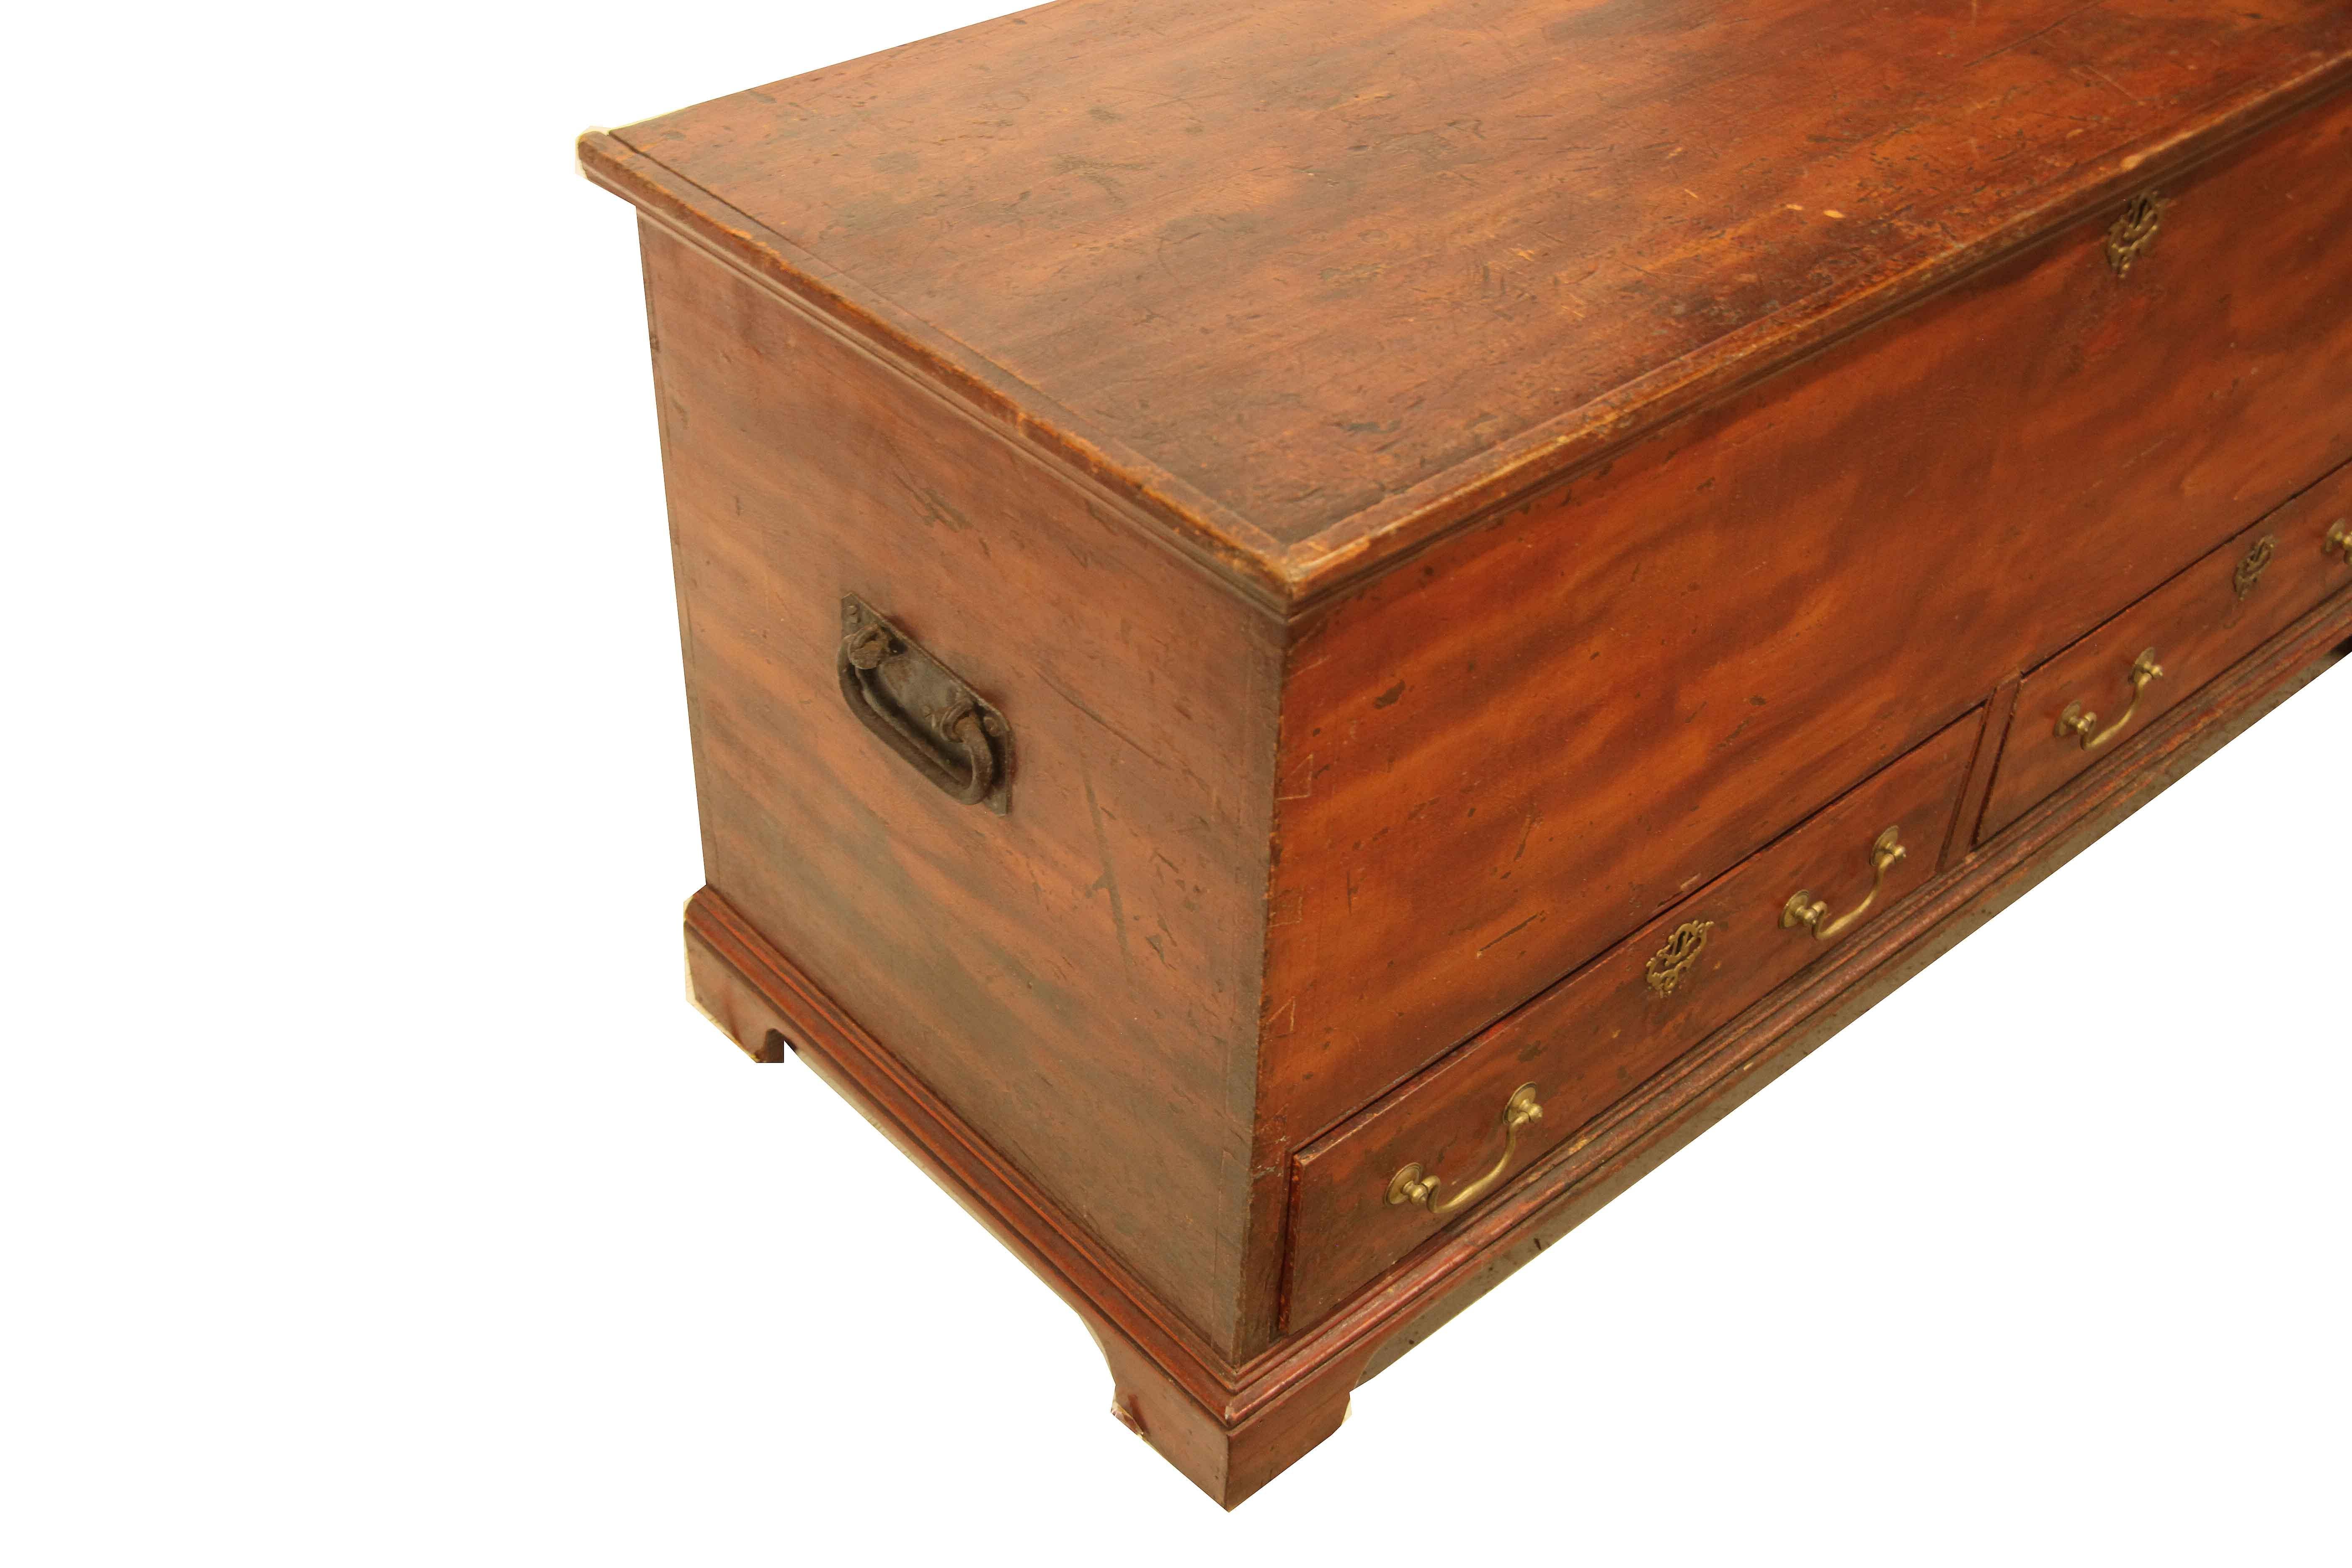 English grain painted blanket chest, entire exterior painted boldly with alternating dark and light shades, open interior with original steel hinges, candle box with lid above single drawer; sides with original steel carrying handles. The two